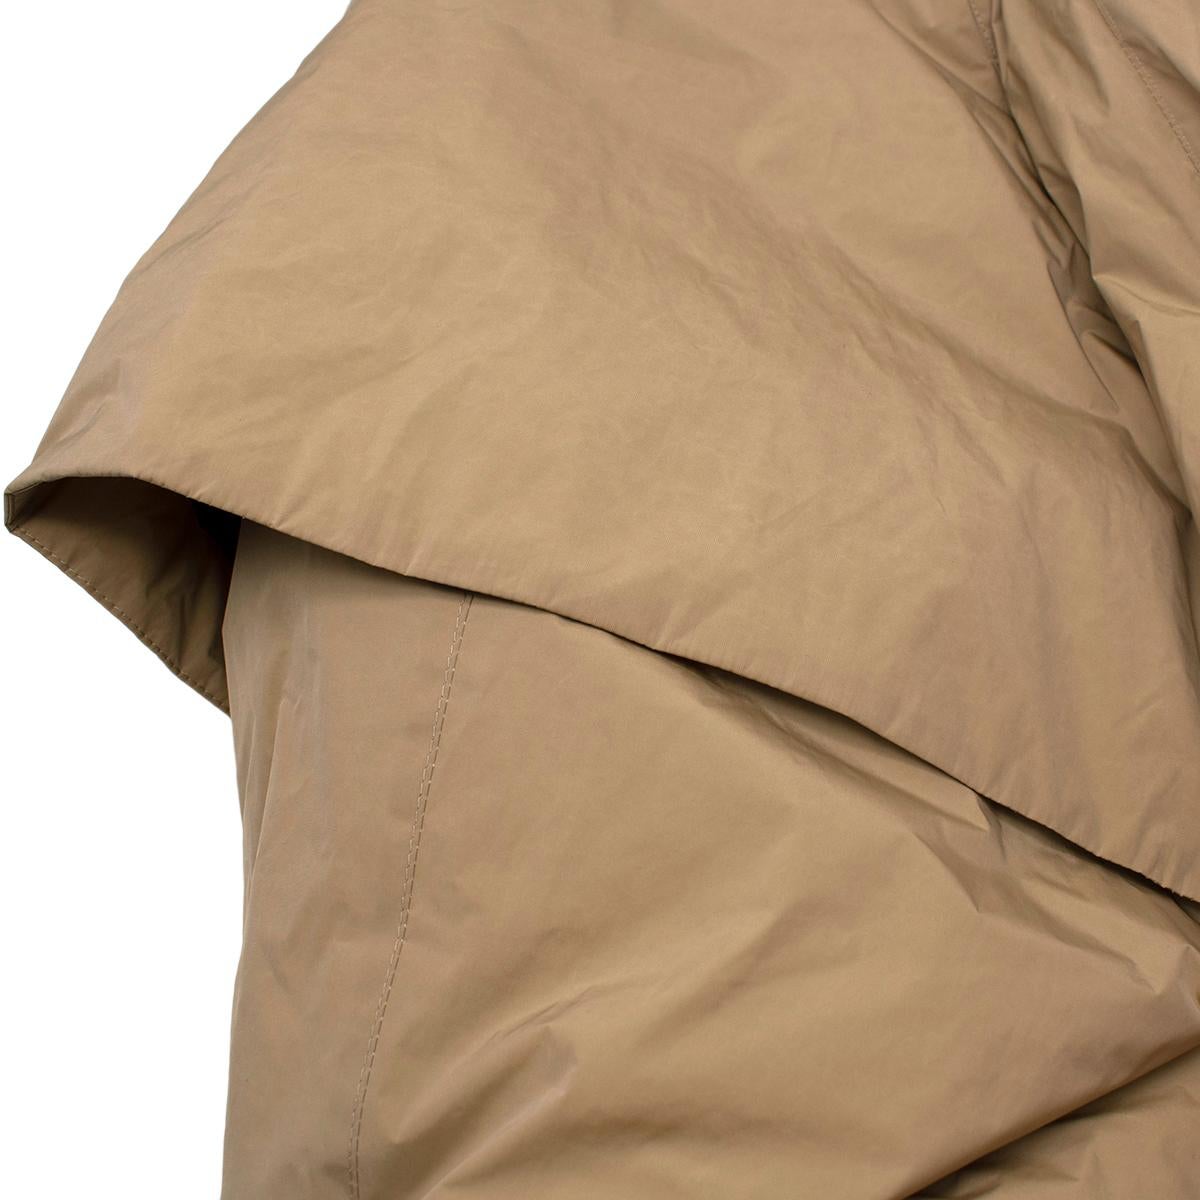 KASSL Editions Nude Coated Taffeta Padded Coat - Size Small For Sale 2